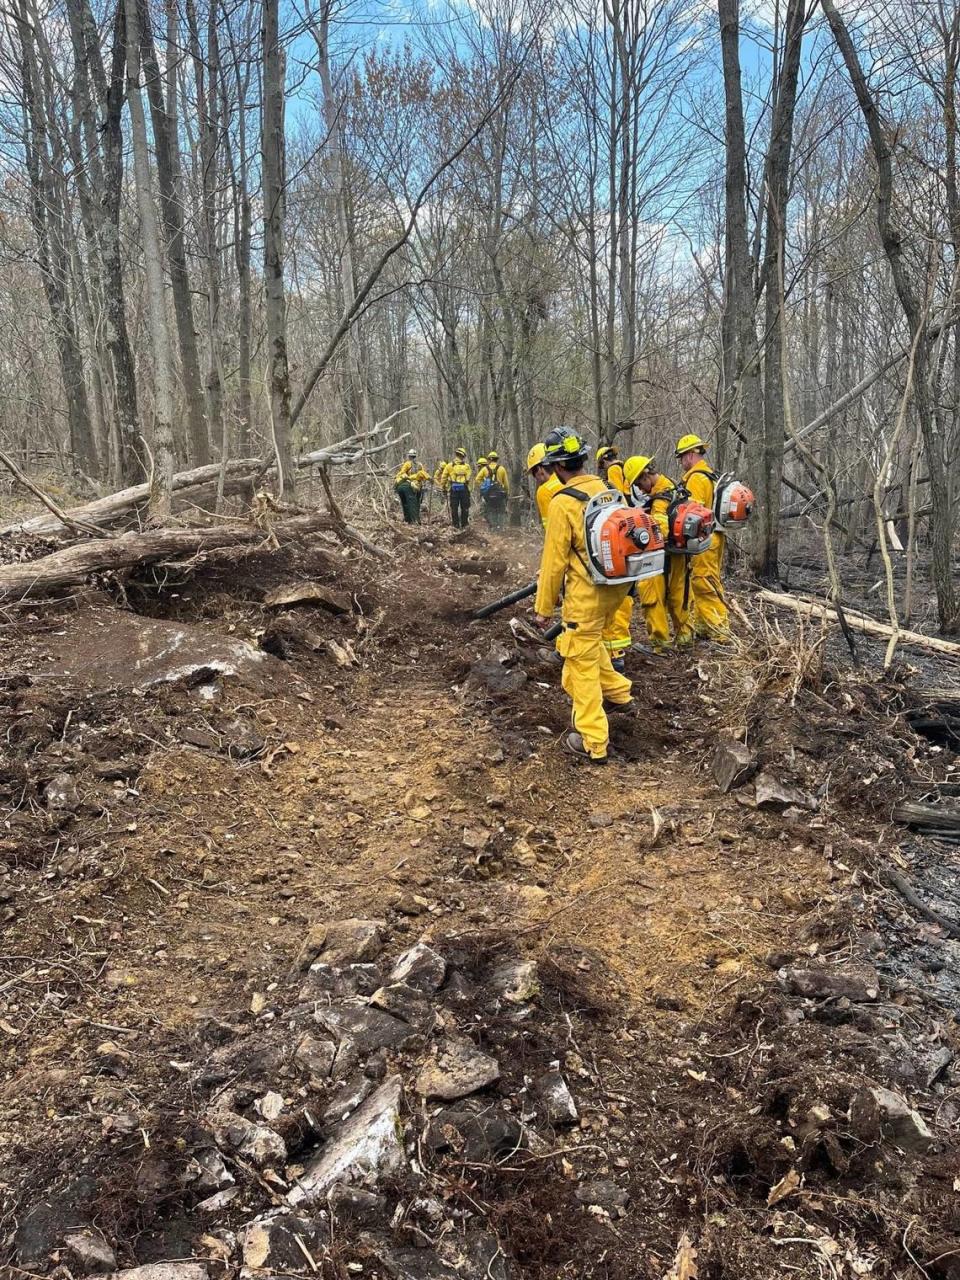 A number of fire companies from Centre, Clearfield and Blair counties battled a forest fire that burned more than 1,500 acres in Rush Township on April 20.